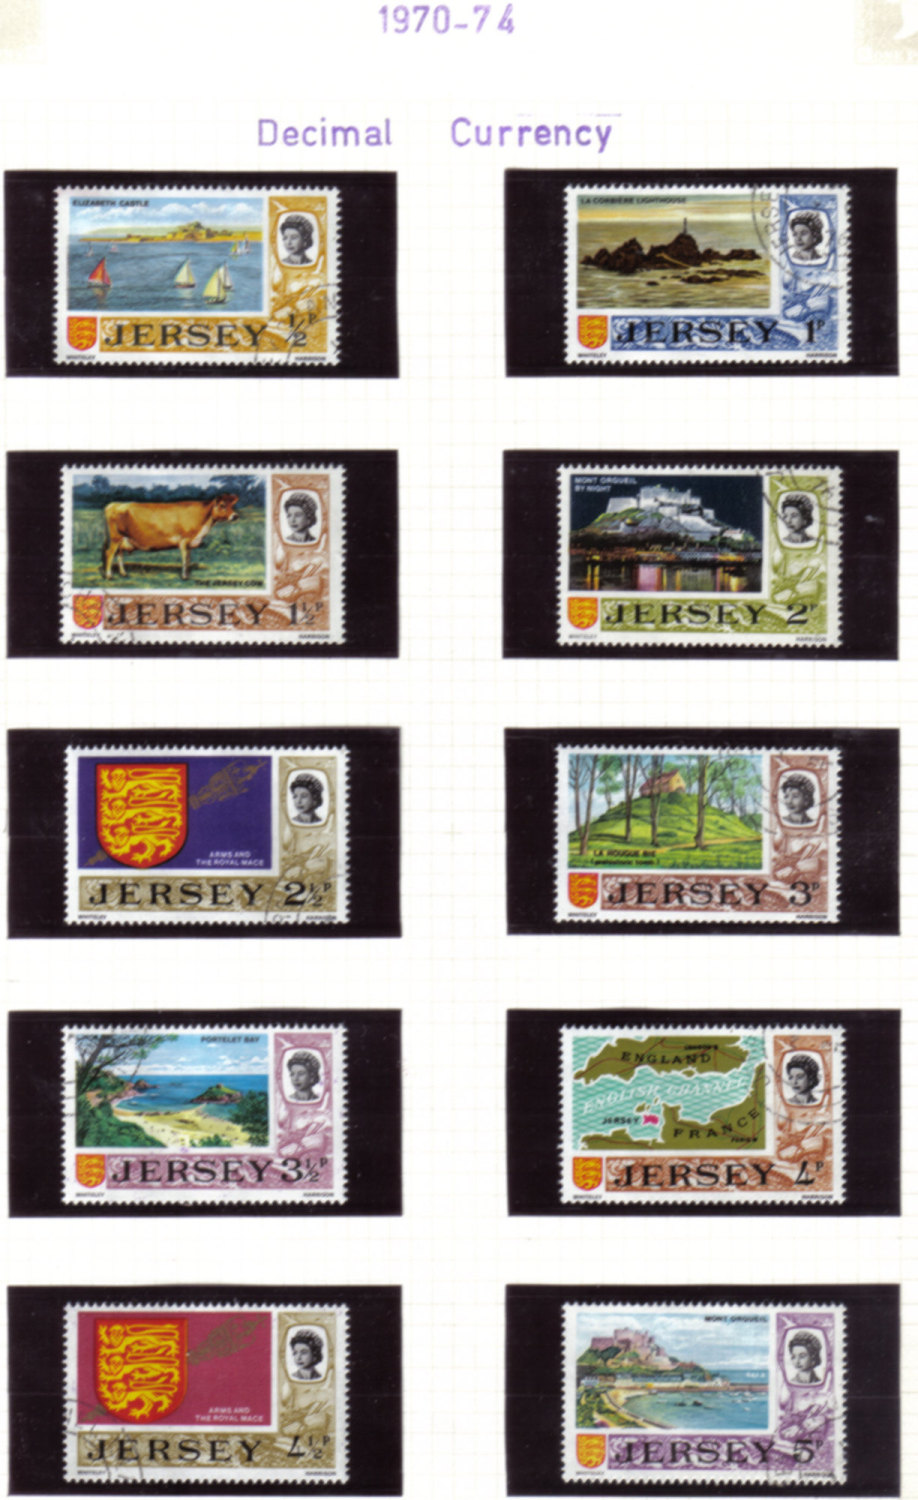 Jersey Stamps 1970-74 Decimal Currency - USED (z533)